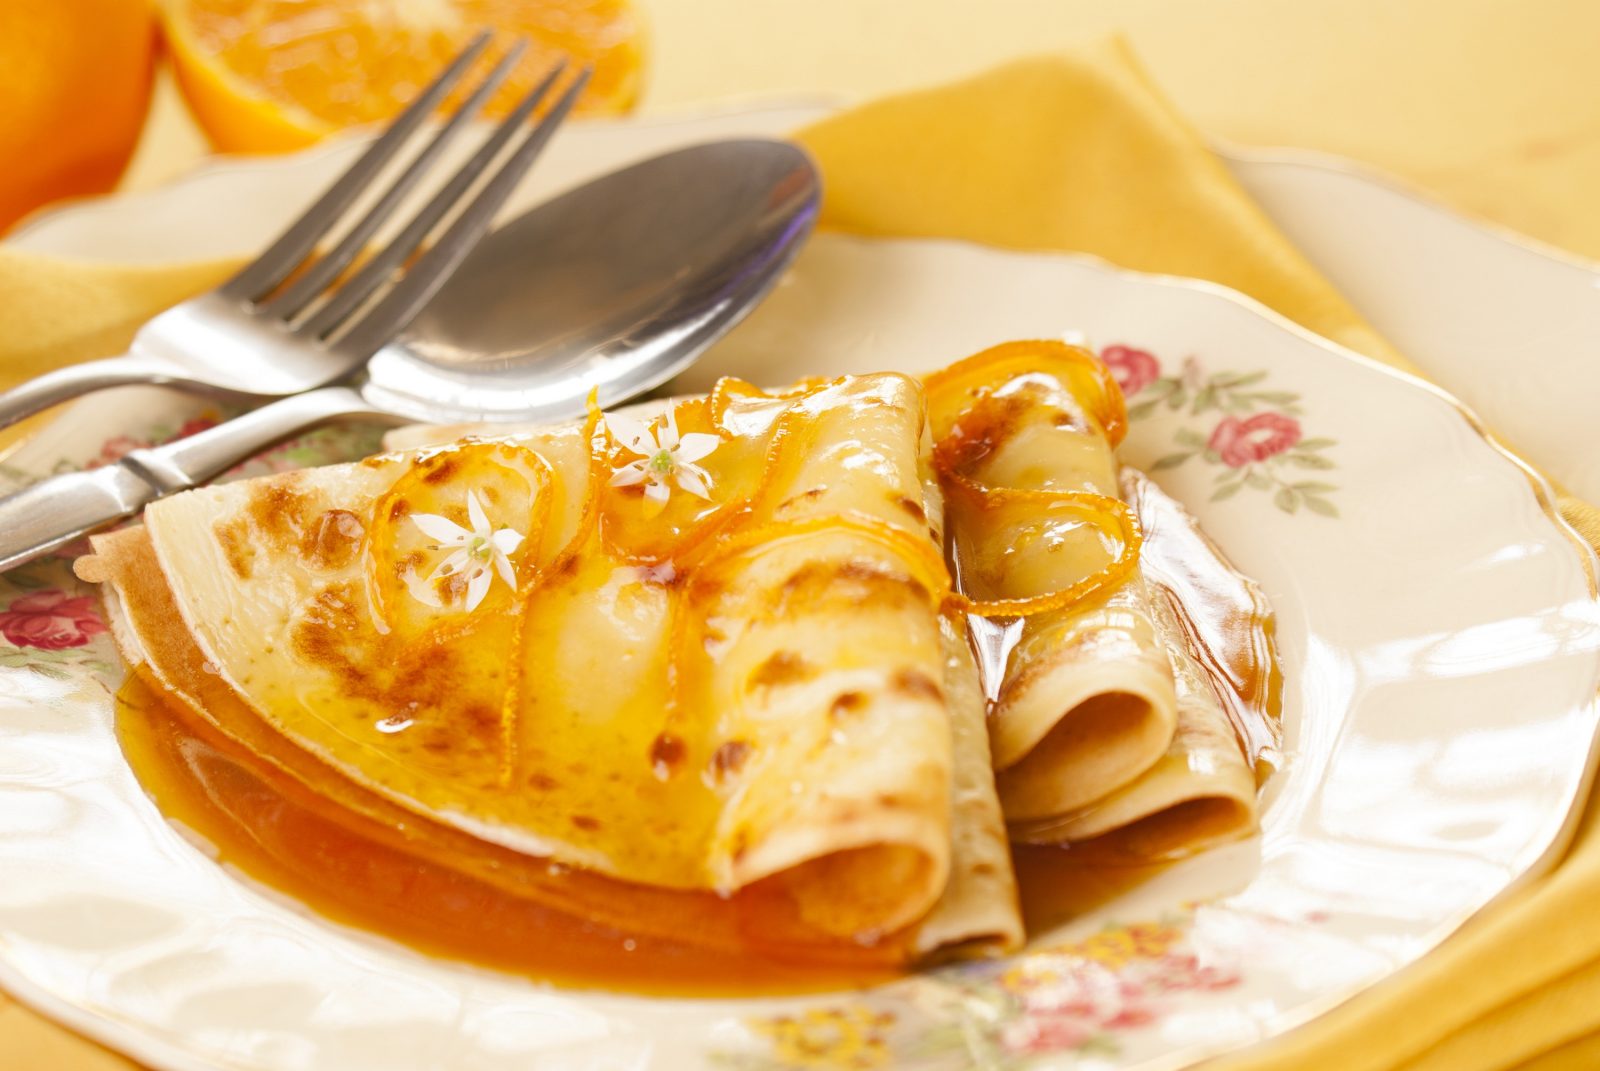 Trust Me, I Can Tell Which Generation You’re from Based on the Retro Food You Like Crêpes suzette